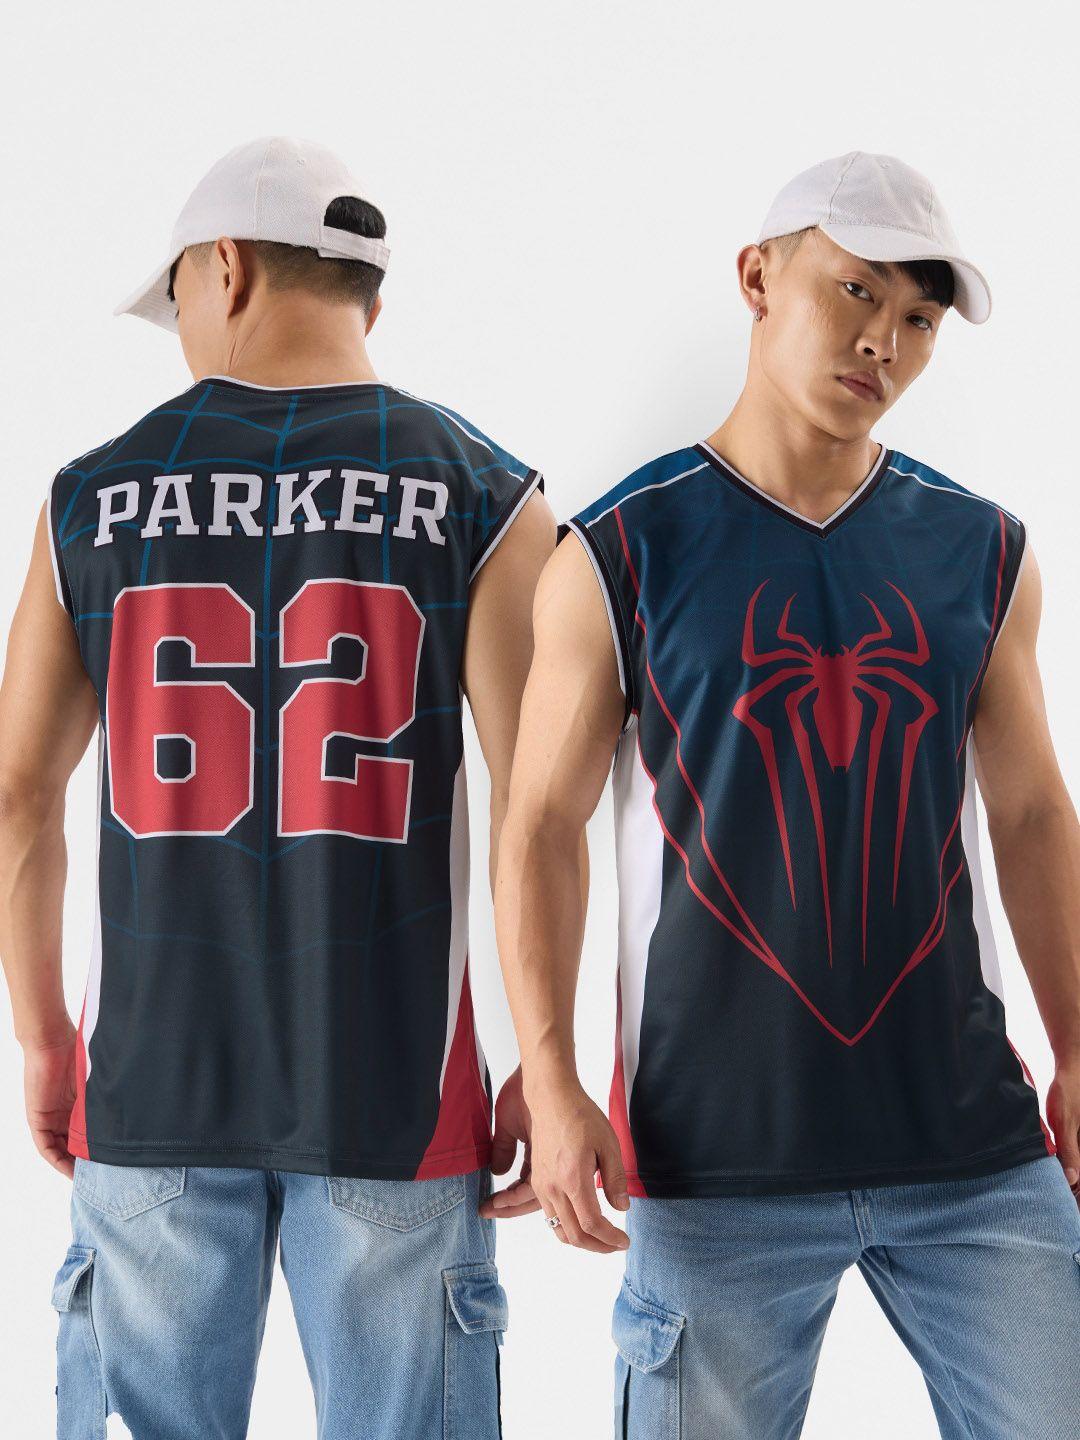 the souled store spider man printed sleeveless gym vest